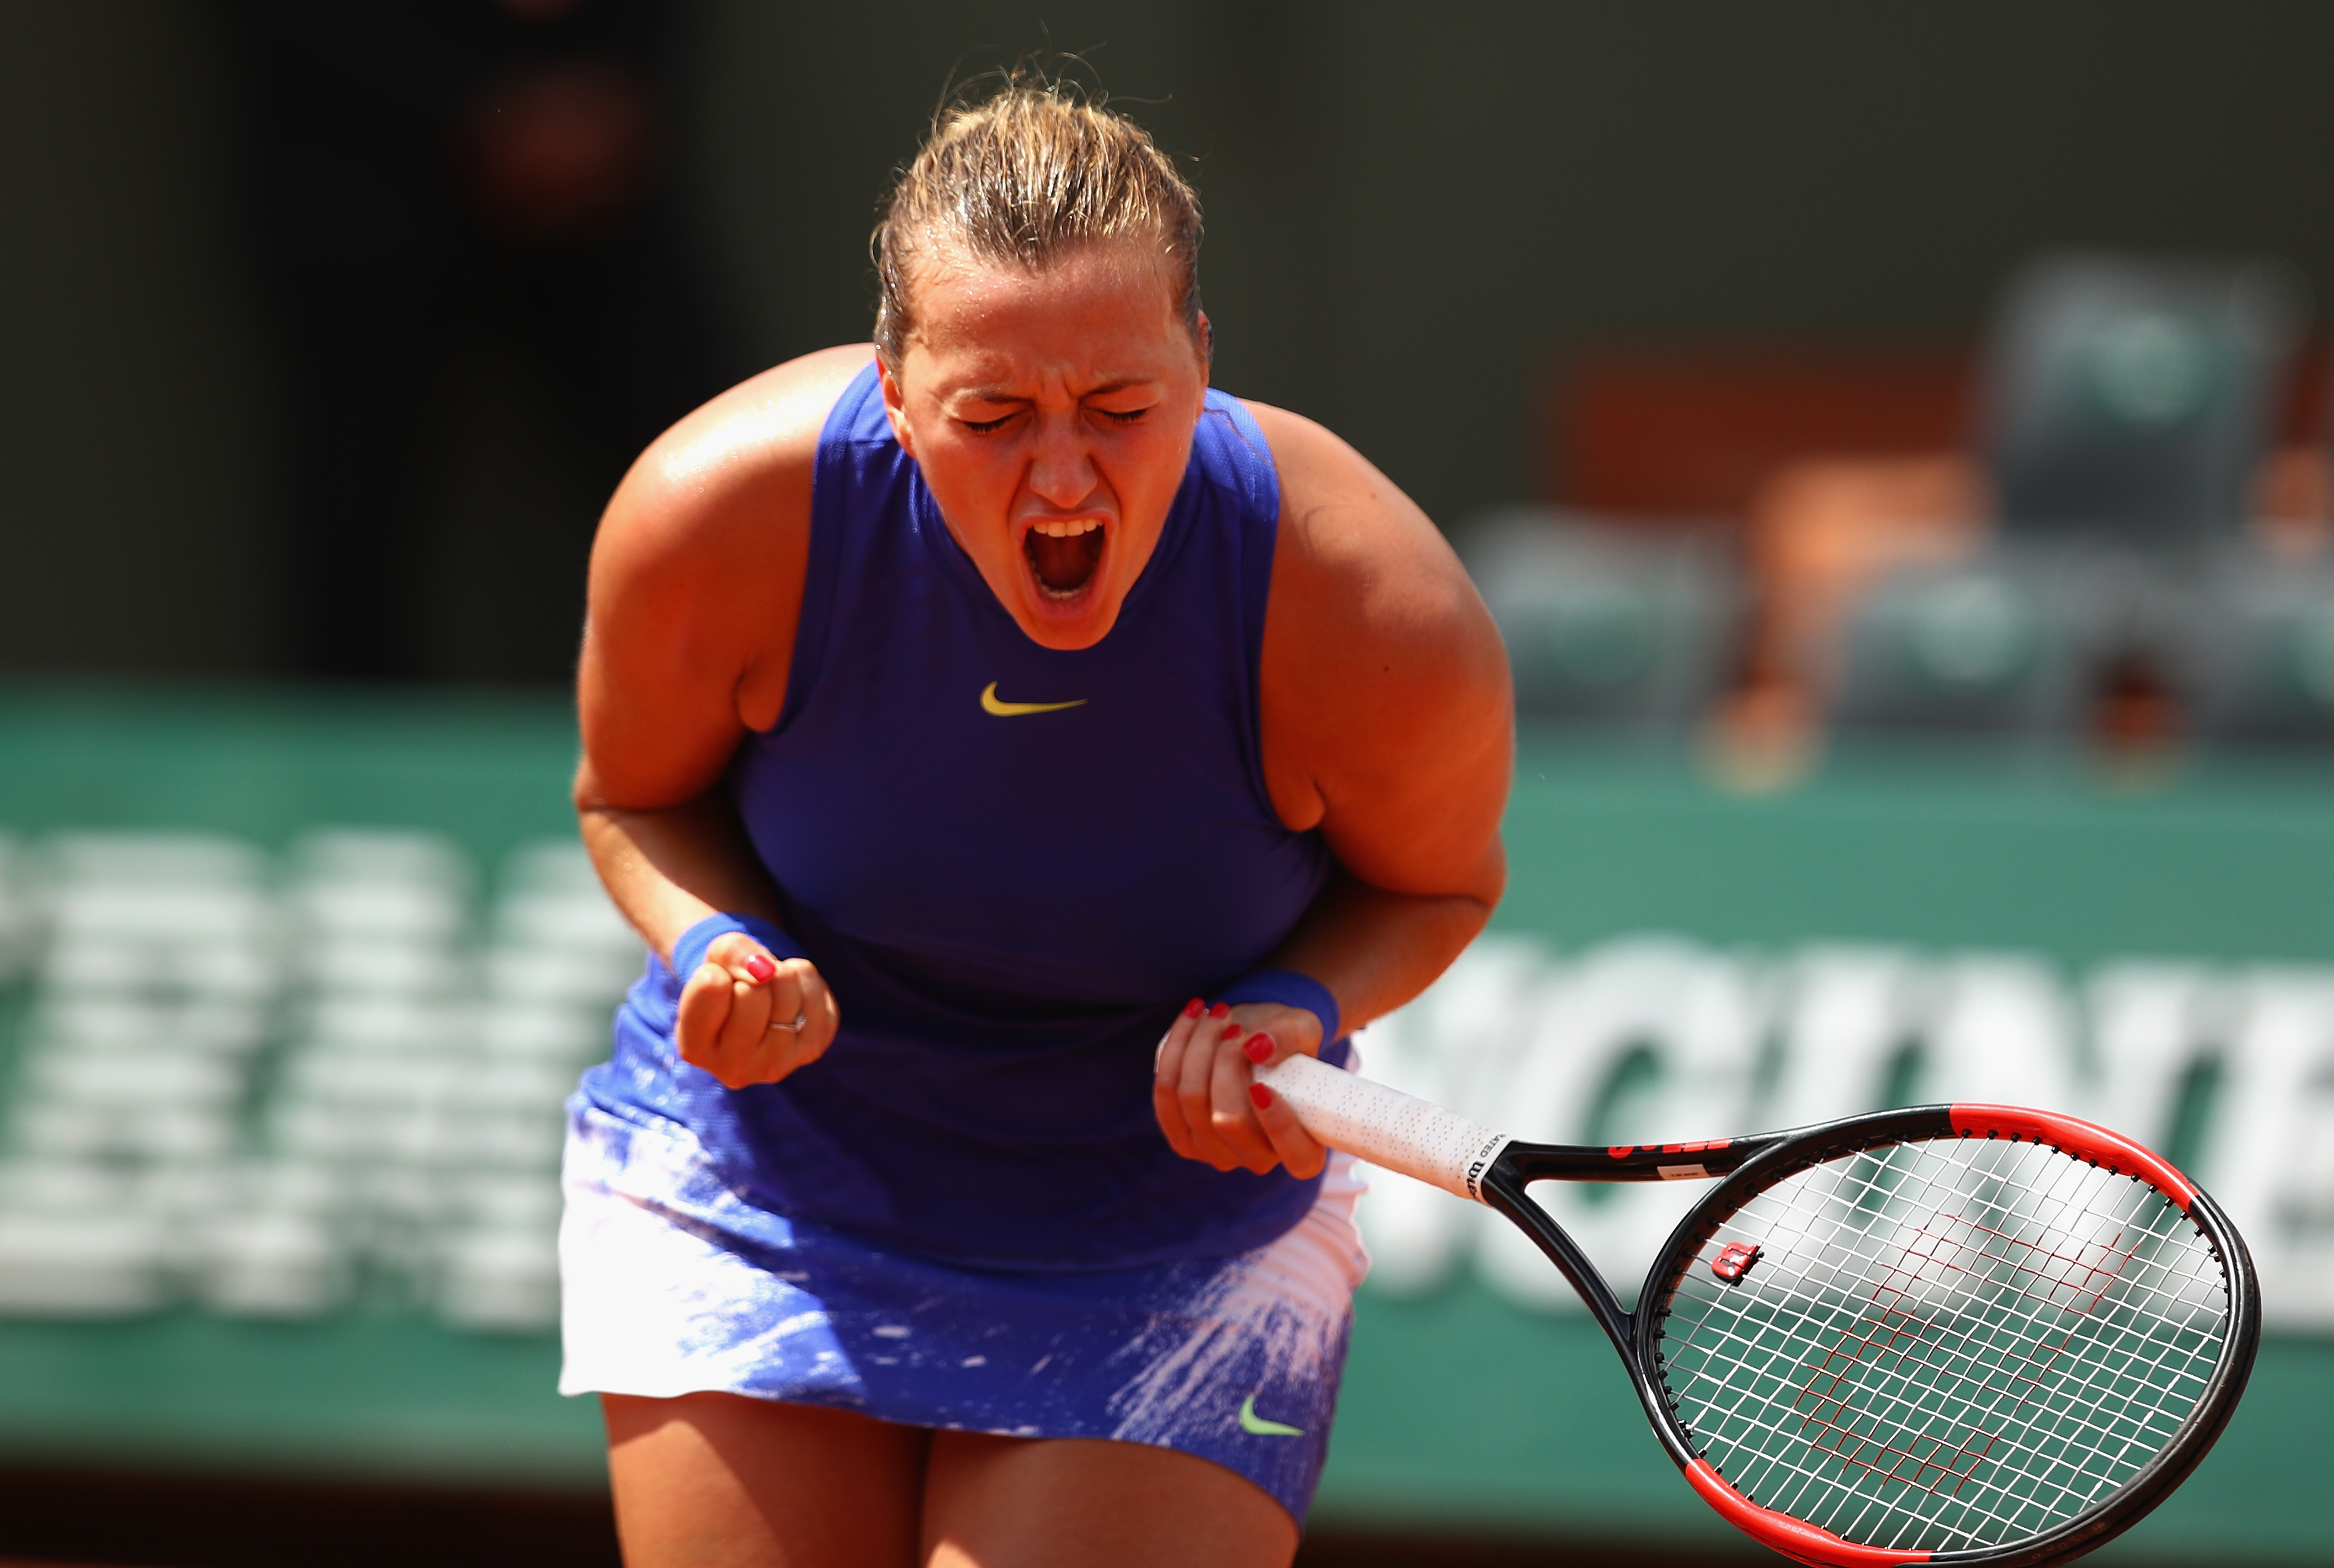 PARIS, FRANCE - MAY 31: Petra Kvitova of The Czech Republic shows her emotions during the ladies singles second round match against Bethanie Mattek-Sands of The United States on day four of the 2017 French Open at Roland Garros on May 31, 2017 in Paris, France. (Photo by Clive Brunskill/Getty Images)